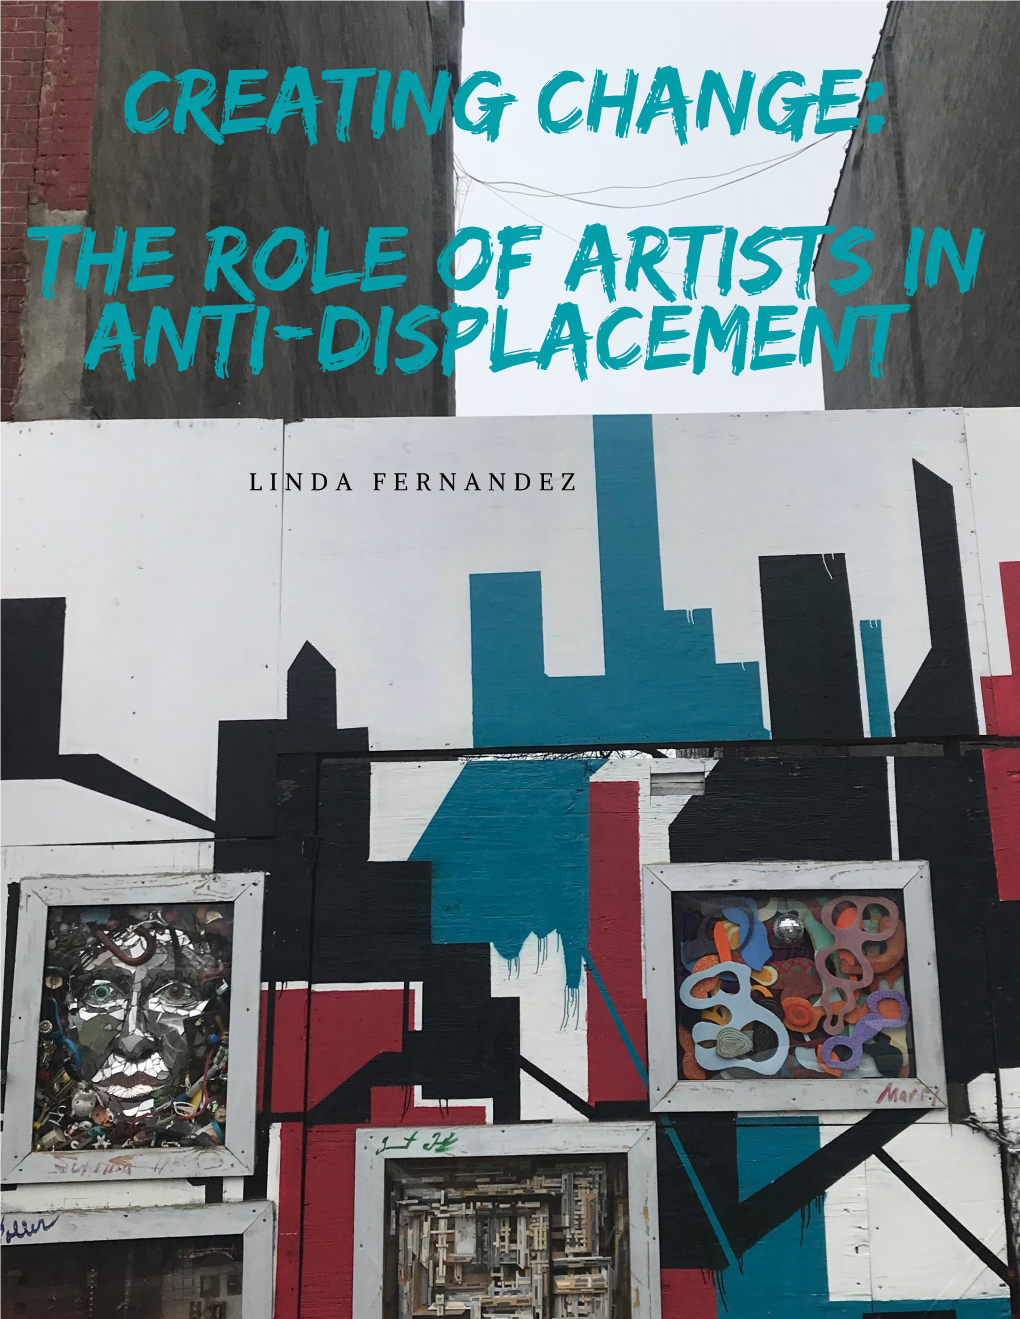 The Role of Artists in Anti-Displacement